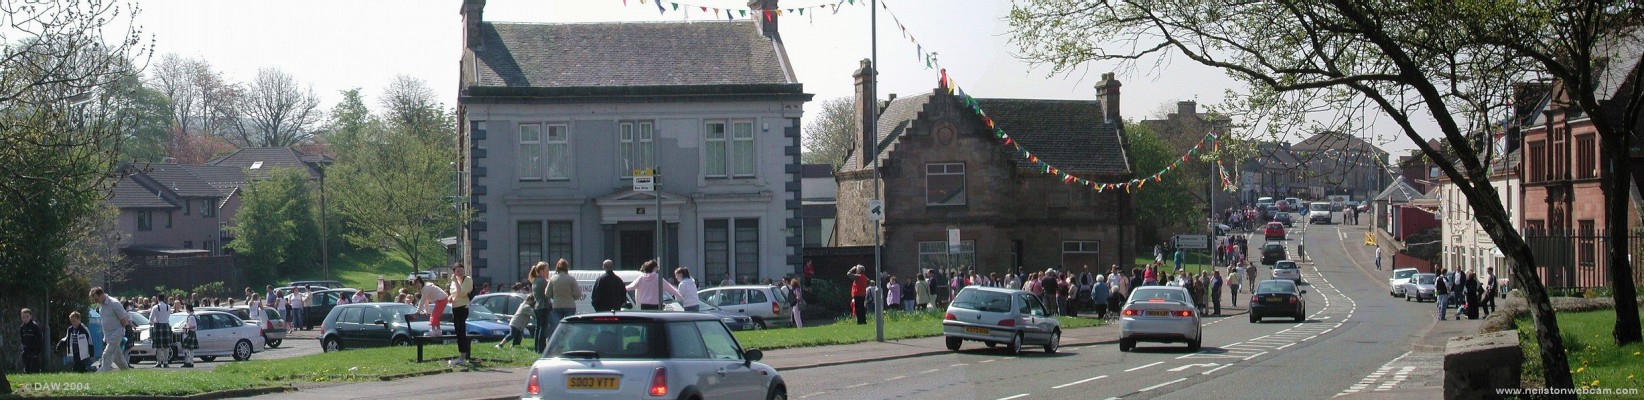 Main Street Panorama, May 2004
Taken on May 1st 2004 as the crowds gather to watch the Parade through the Village to the Neilston Show.  The Masonic Lodge is the grey building near the centre of the picture and the Glen Halls are on the extreme right.  
